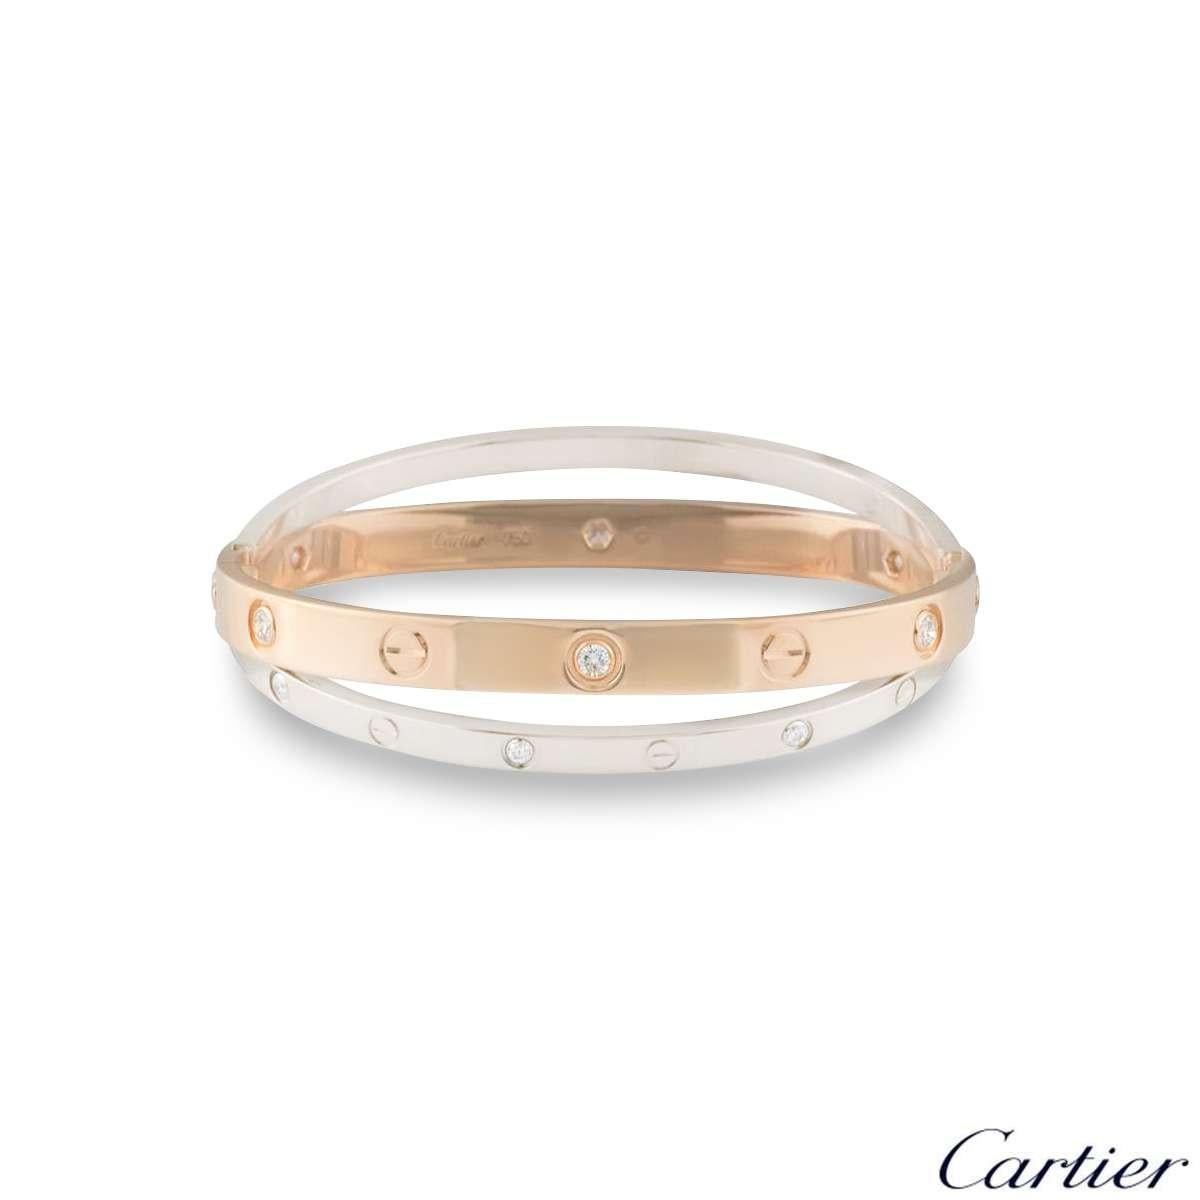 A stunning 18k double rose and white gold diamond bangle by Cartier from the Love collection. The rose gold bangle is set with 6 round brilliant cut diamonds and alternating screw motifs, interlinking with it is a white gold band on either side also